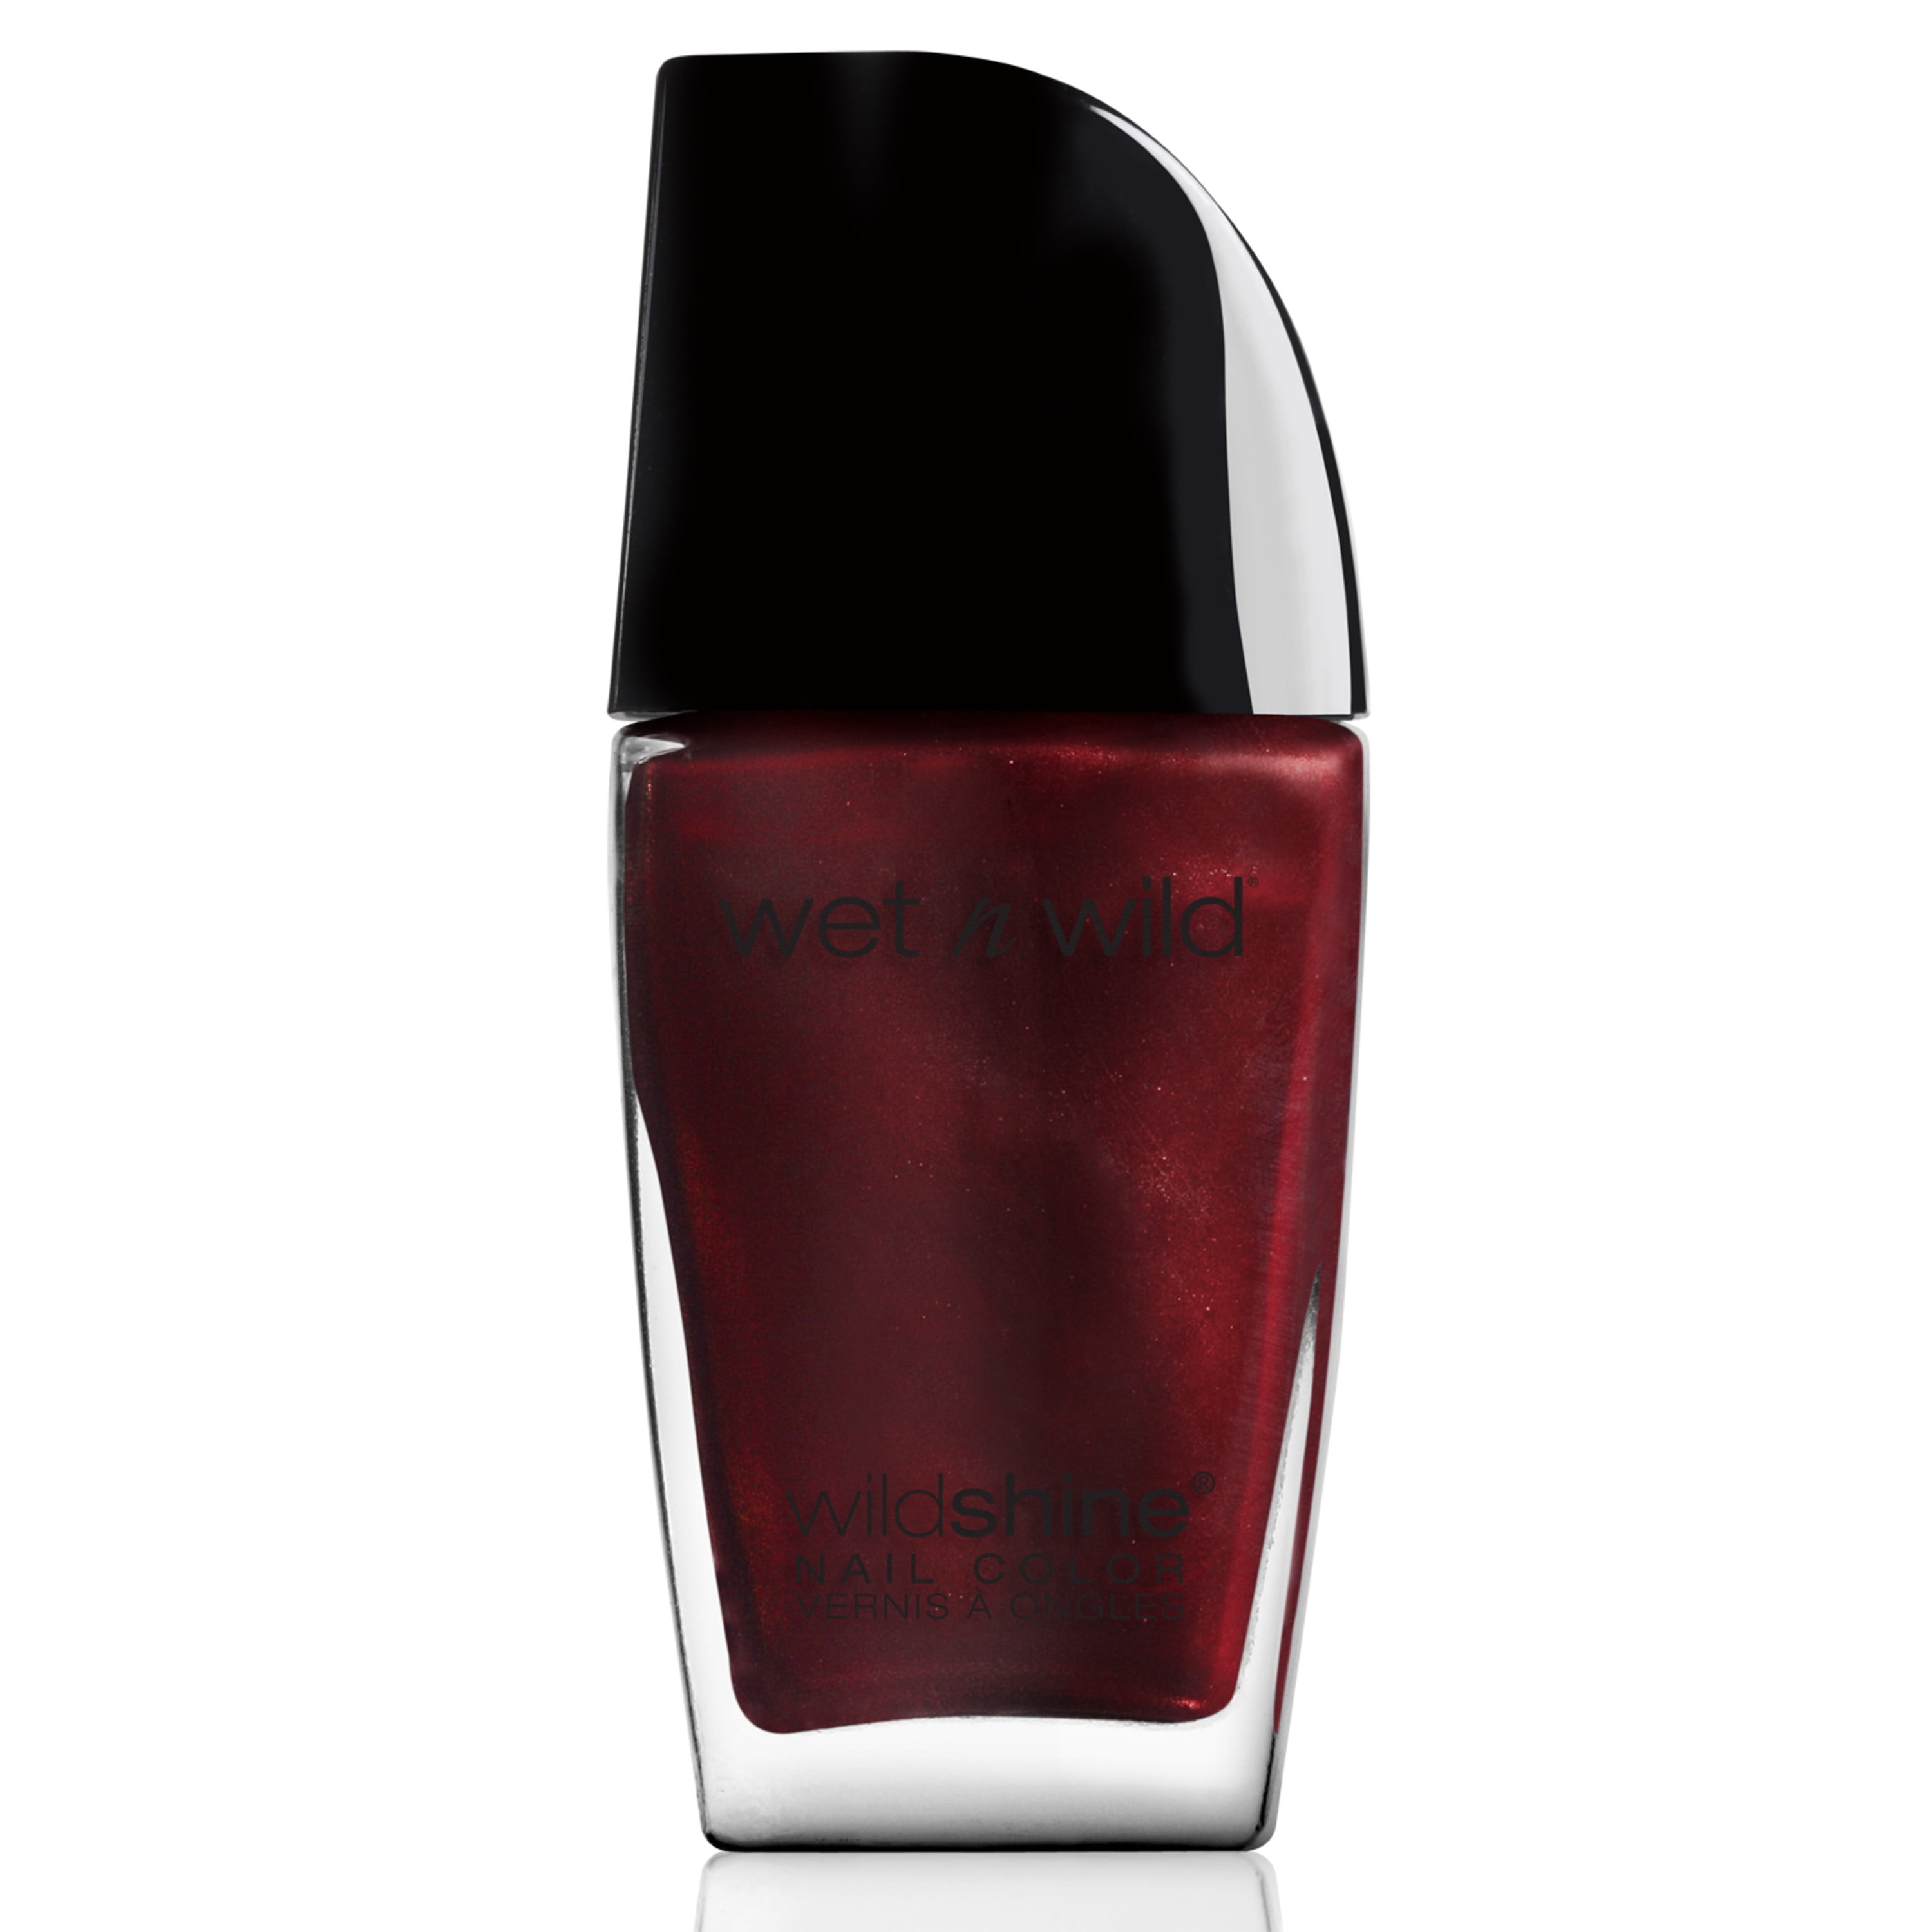 Wondrously Polished: Wet N Wild, 1-Step Wonder Gel: Swatches & Review